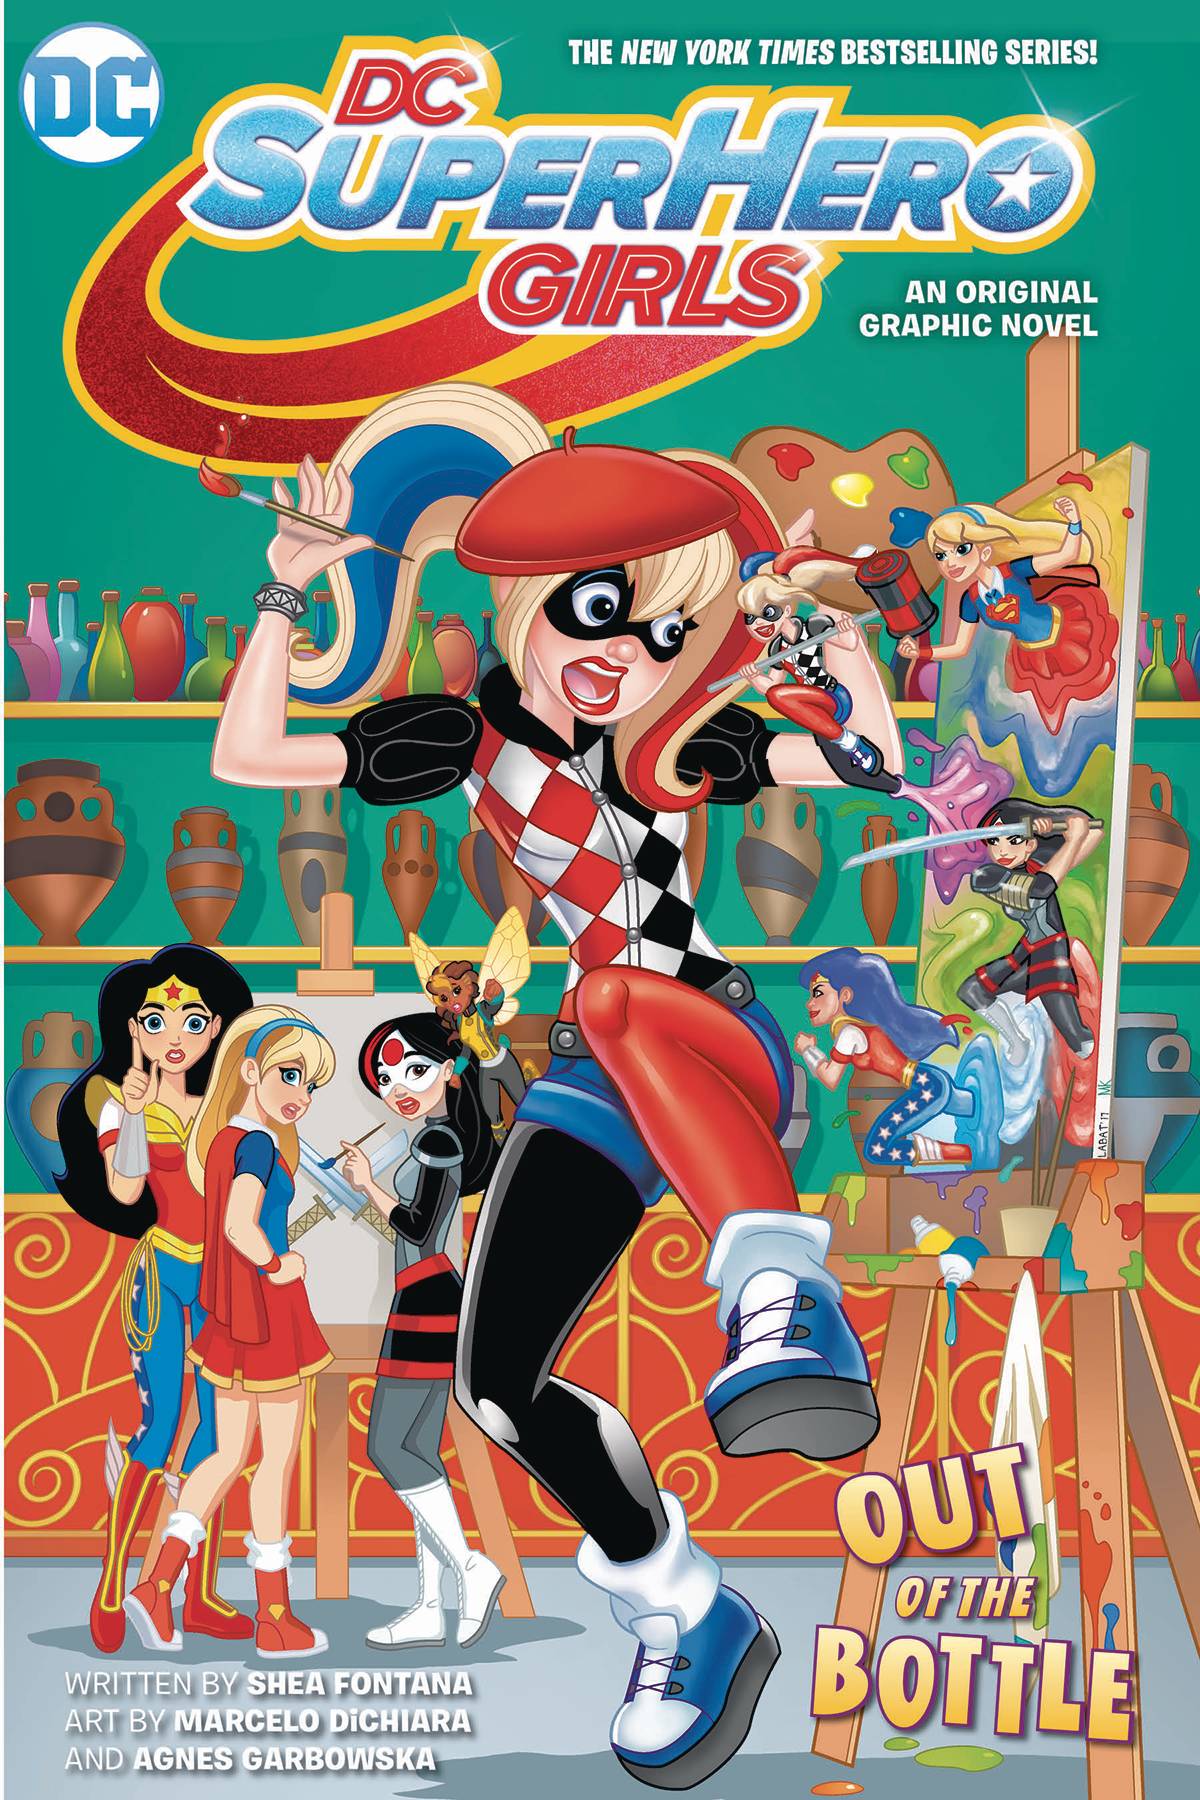 DC Super Hero Girls vol 6: Out Of The Bottle s/c